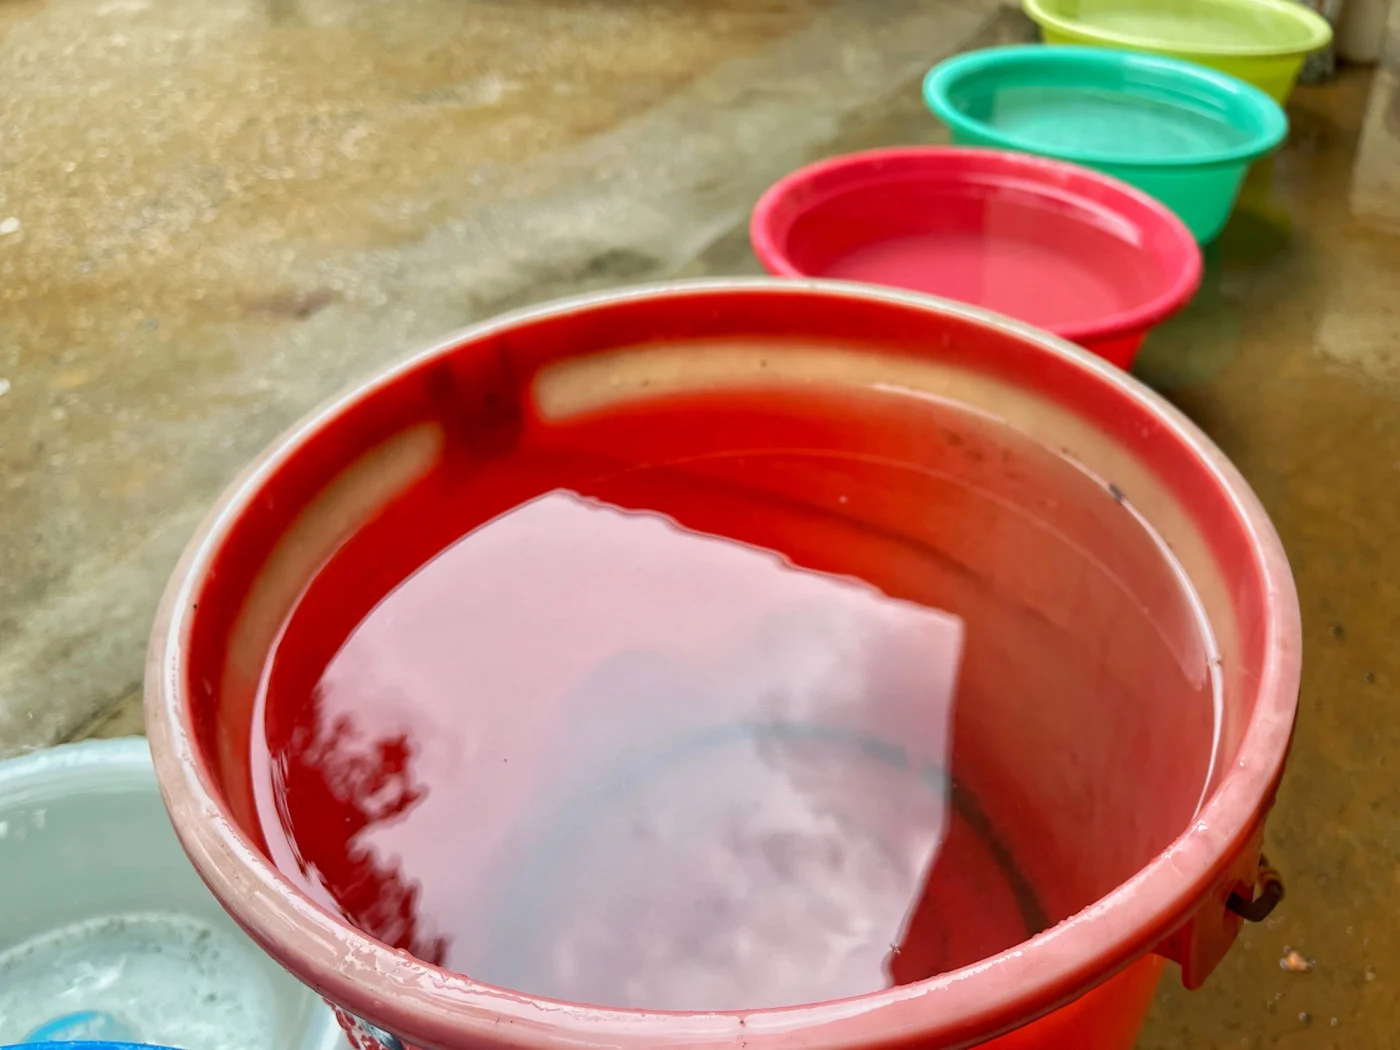 Close-up of a row of colourful pails with collected rainwater as part of recycling effort in Singapore. (Calvin Chan Wai Meng/ Moment/ Getty Images)